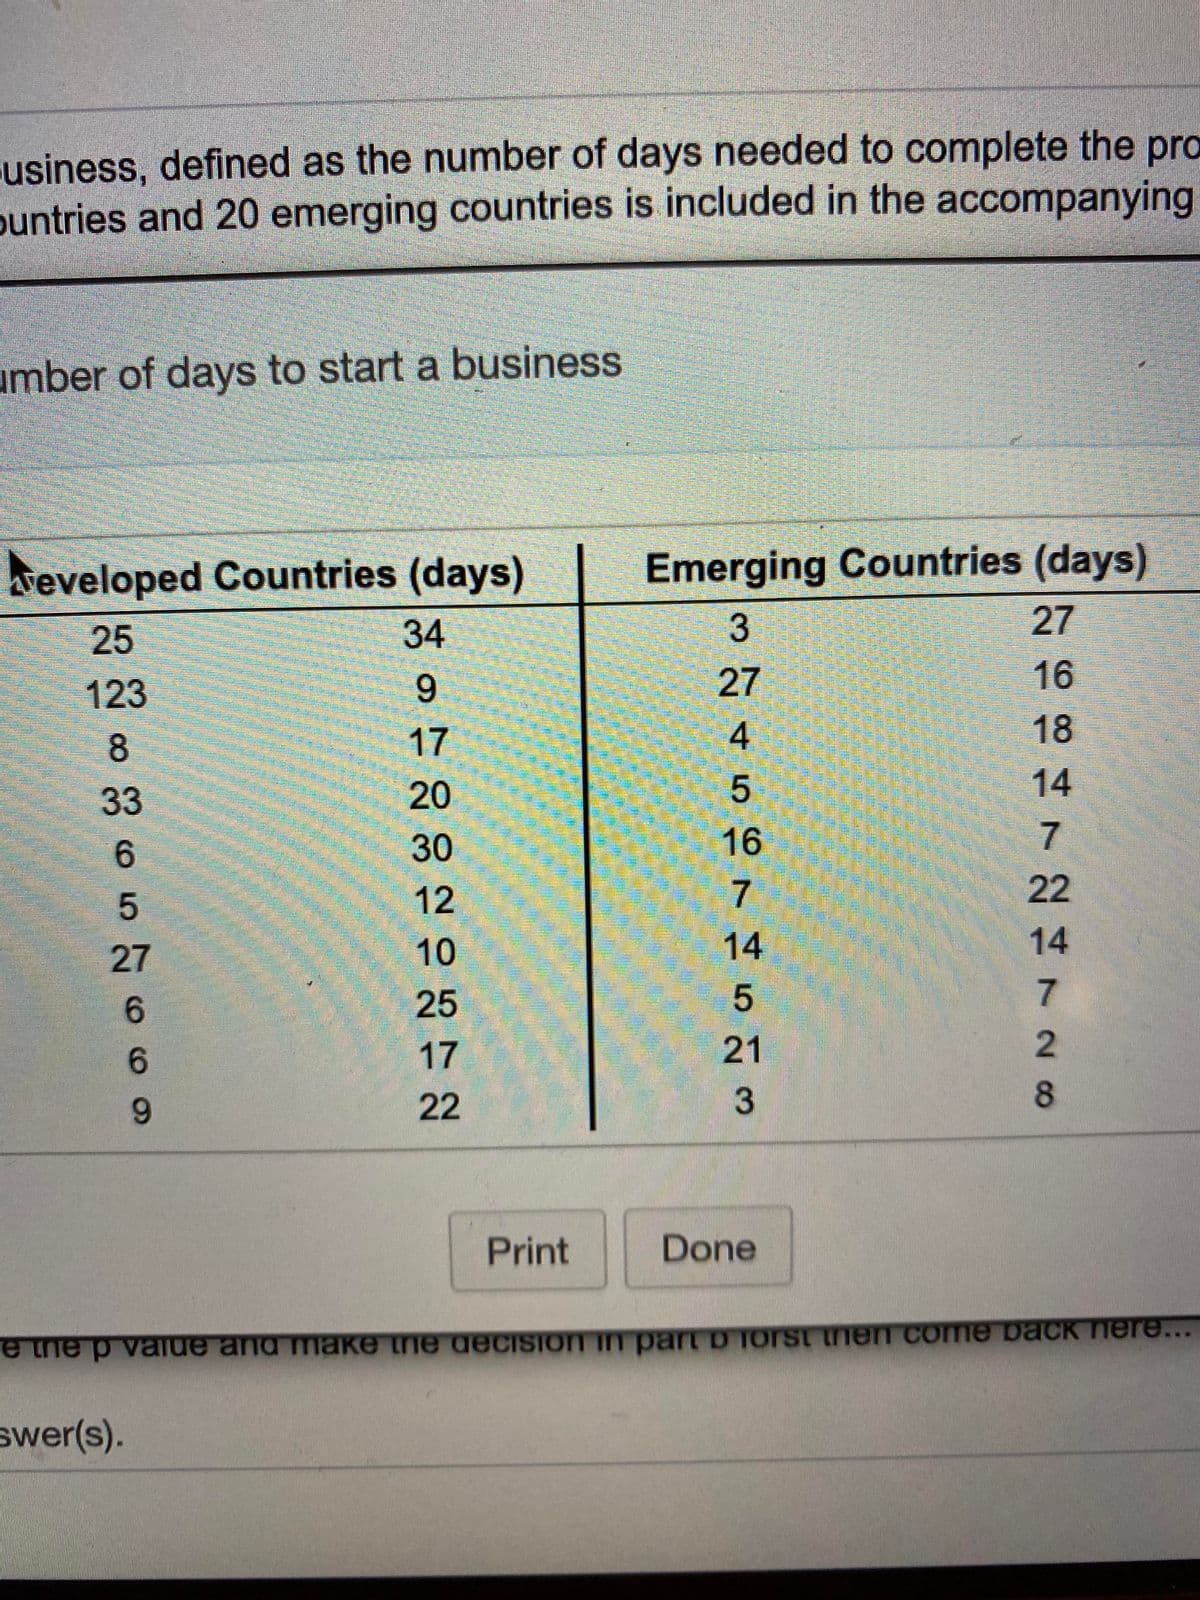 usiness, defined as the number of days needed to complete the pro
buntries and 20 emerging countries is included in the accompanying
umber of days to start a business
Emerging Countries (days)
27
eveloped Countries (days)
25
34
123
27
16
8
17
4
18
14
5
16
33
20
6.
30
12
7
22
27
10
14
14
6.
25
5
6.
17
21
6.
22
Print
Done
e the p value and make the decision in part D Torst then comne back here...
swer(s).
さ7Nさ728
3.
9.
